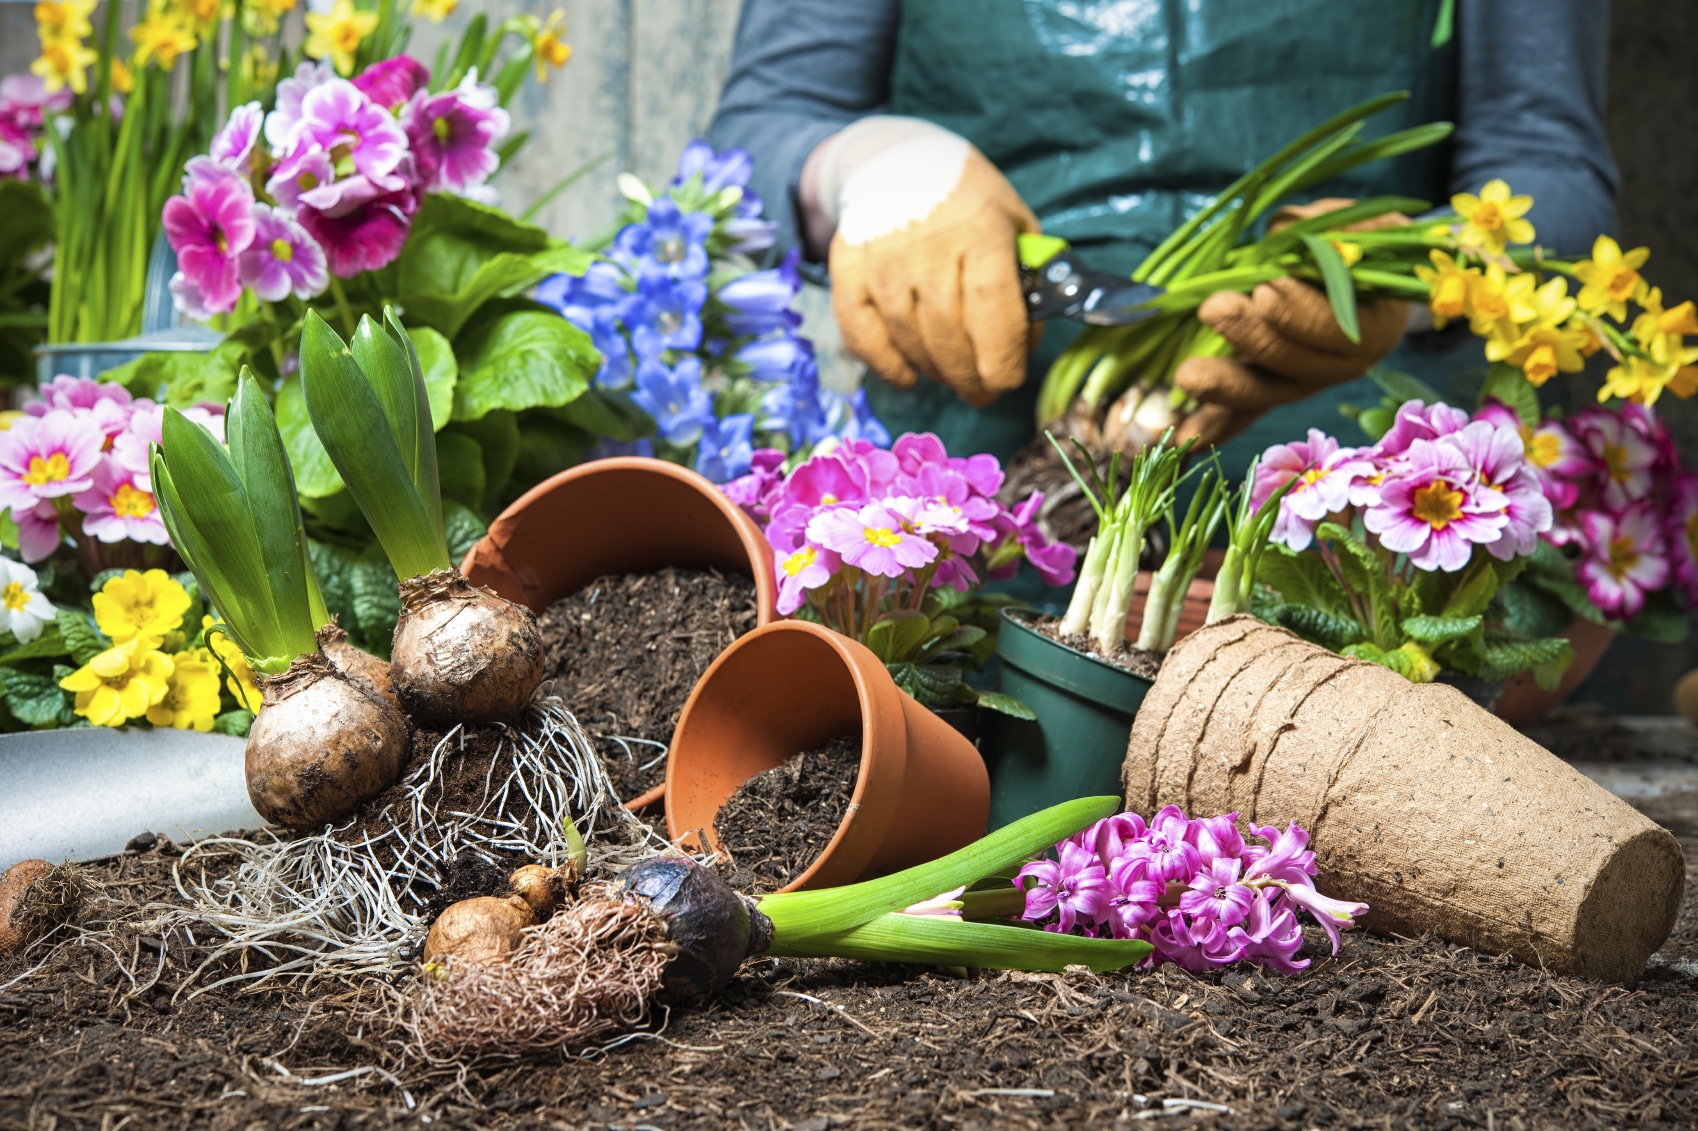 Here's What You Need to Know About Gardening